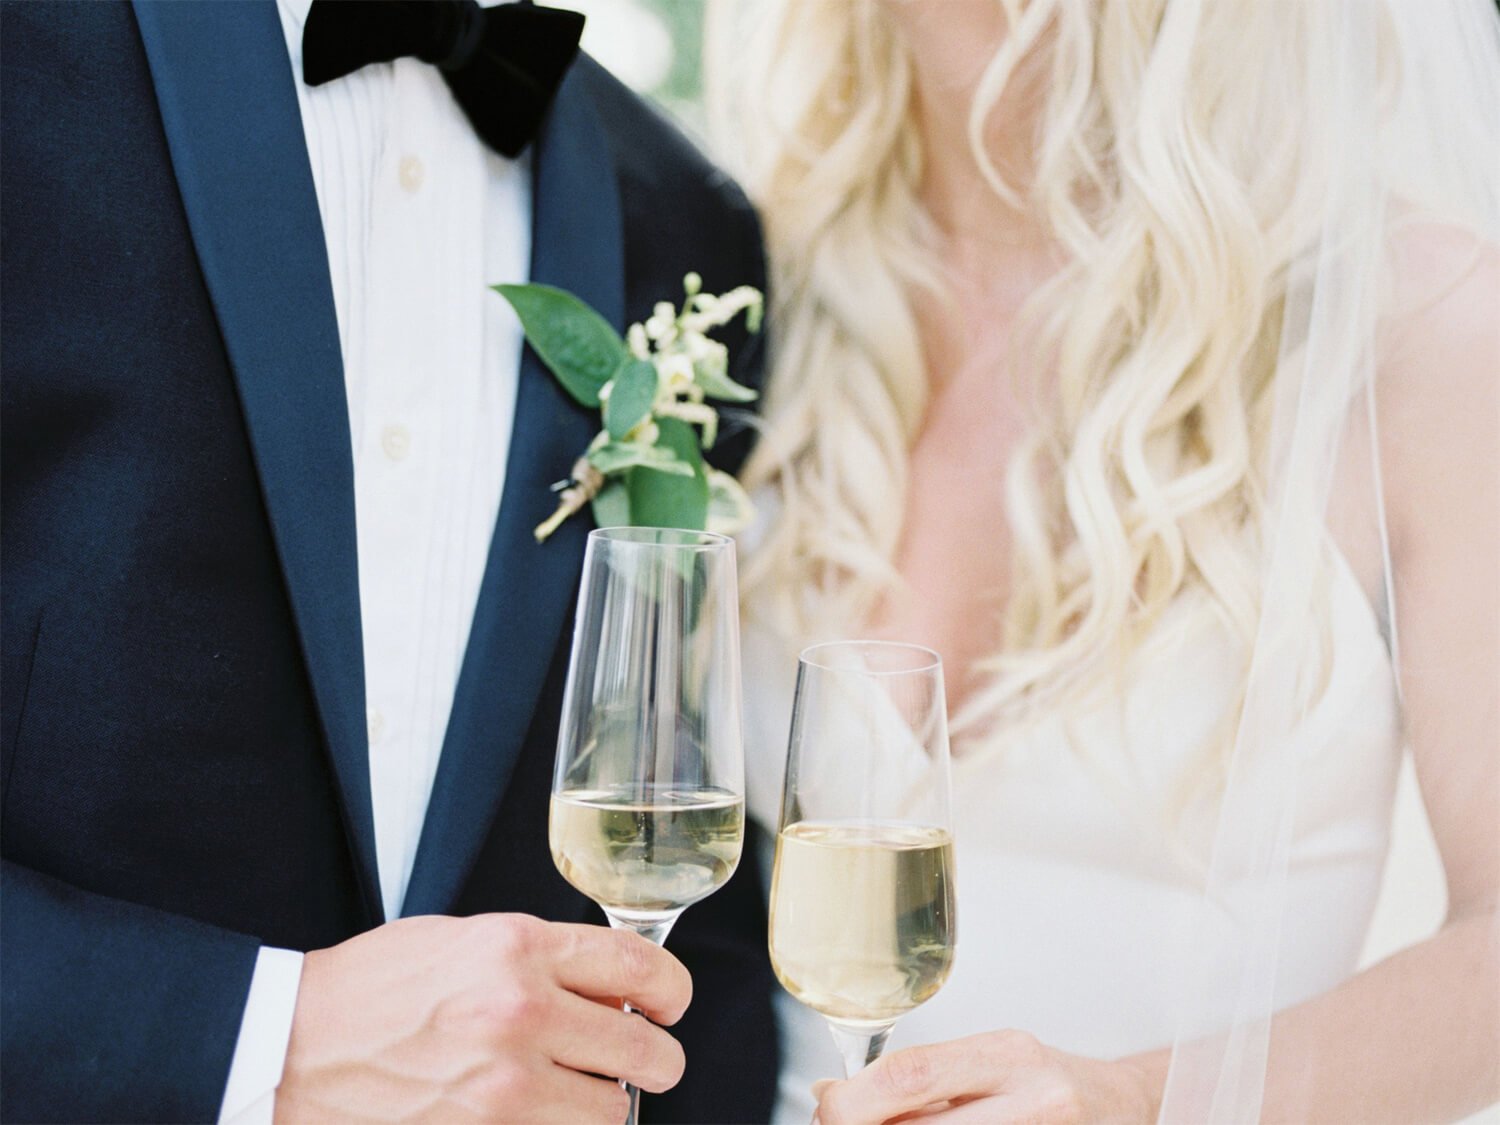 Bride and Groom holding wedding champagne glasses